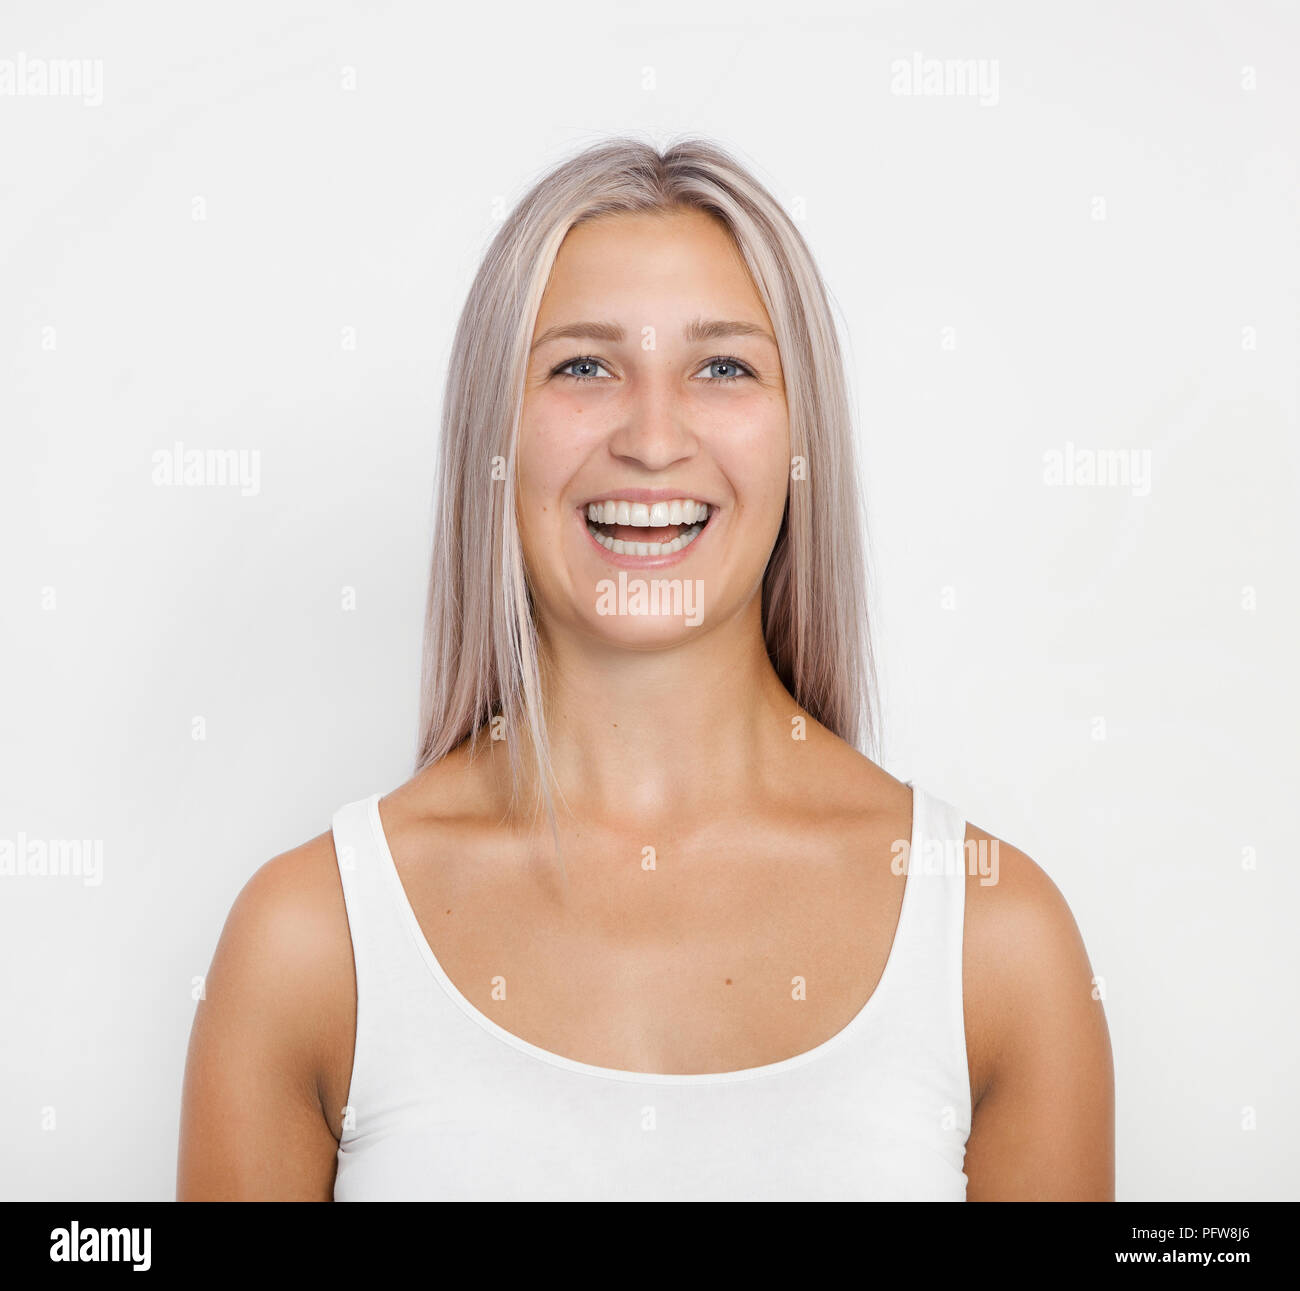 A young woman with modern silver hairstyle laughs at the camera, white background, isolated Stock Photo